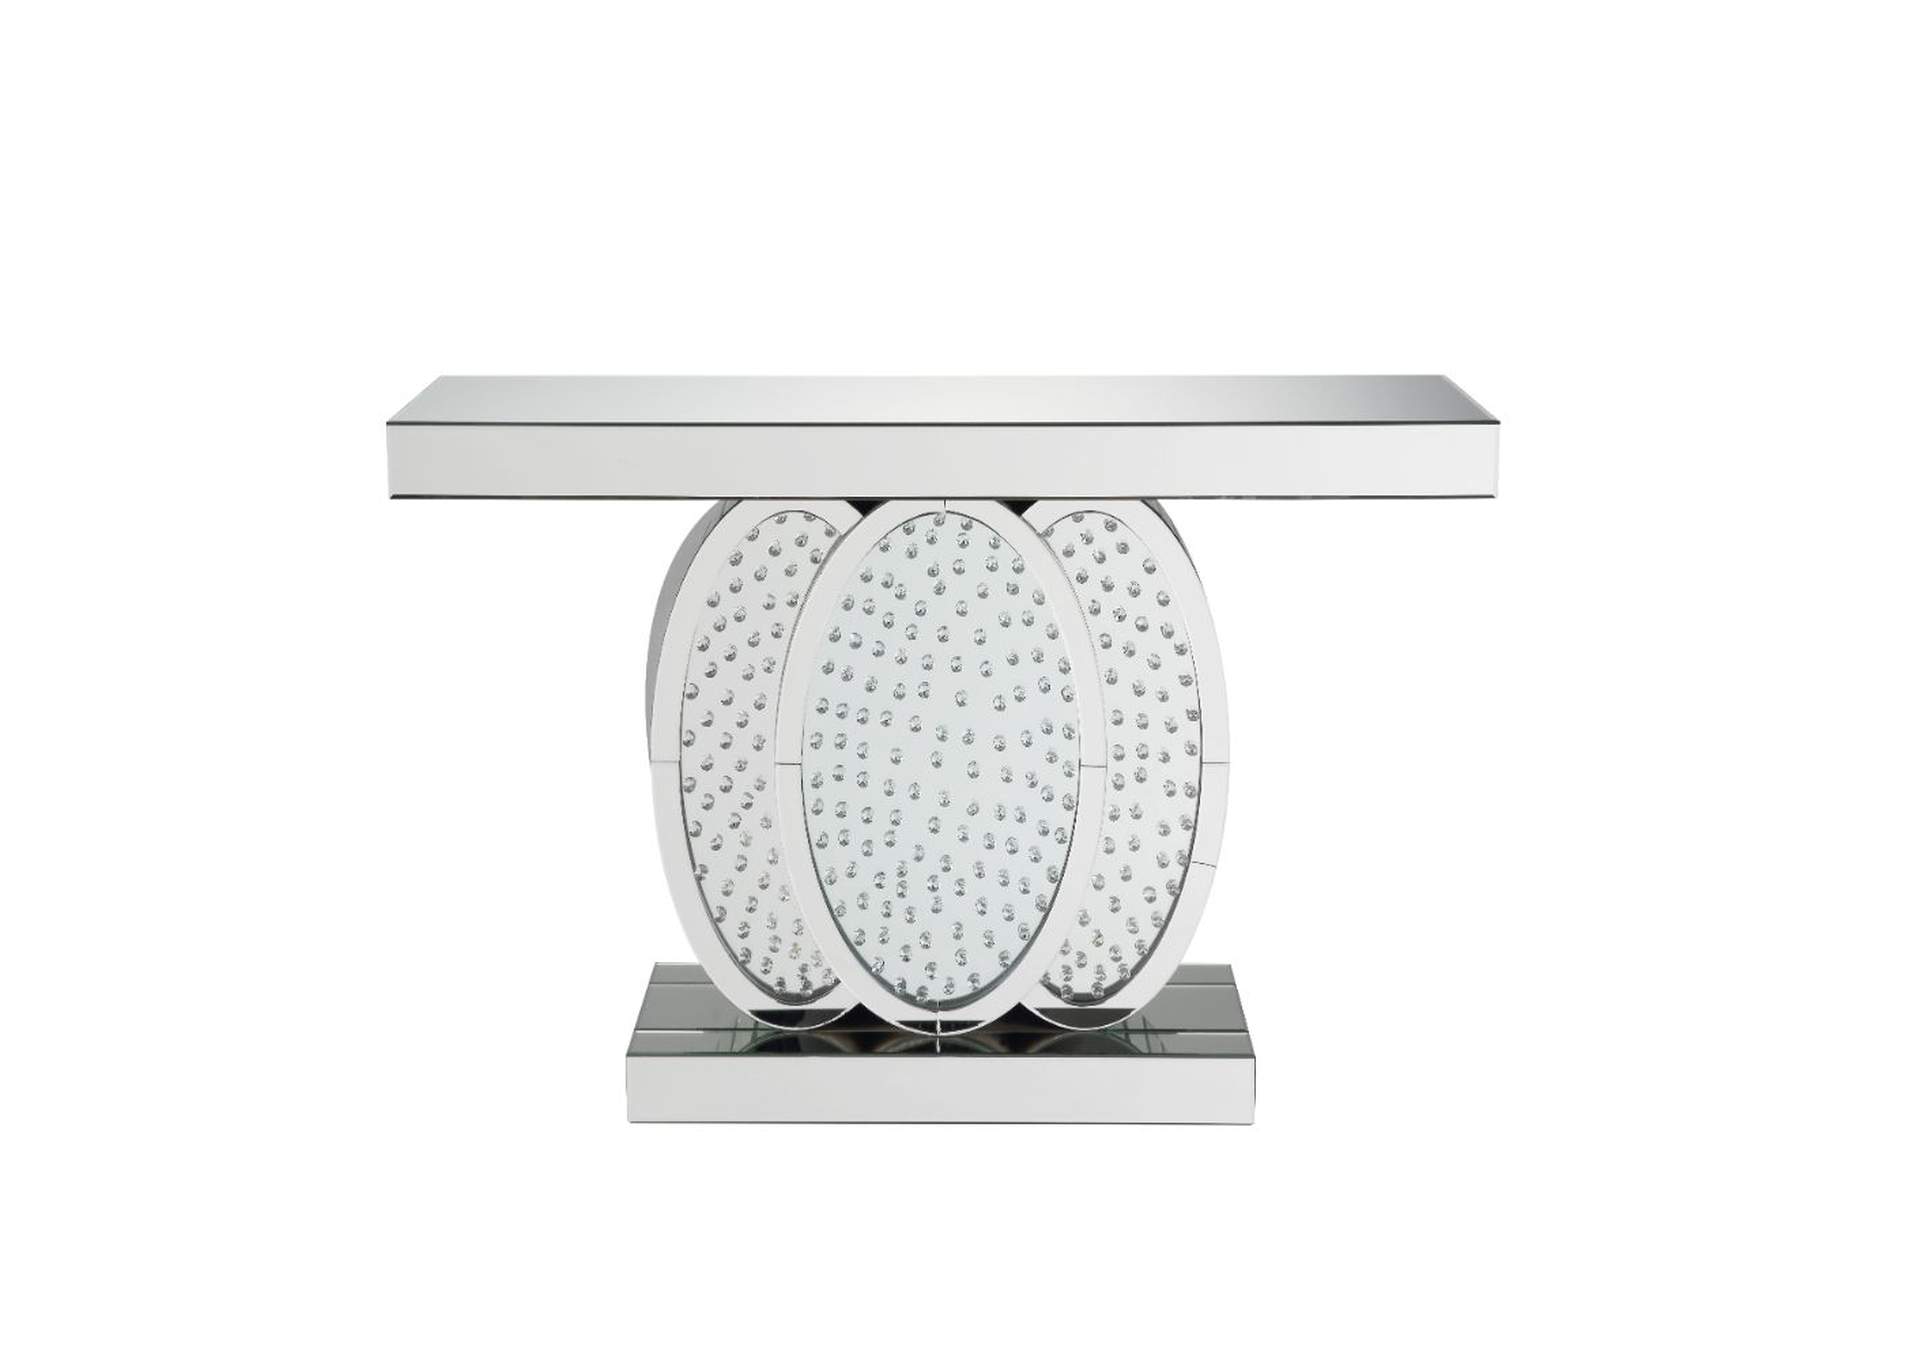 Nysa Mirrored & Faux Crystals Accent Table,Acme